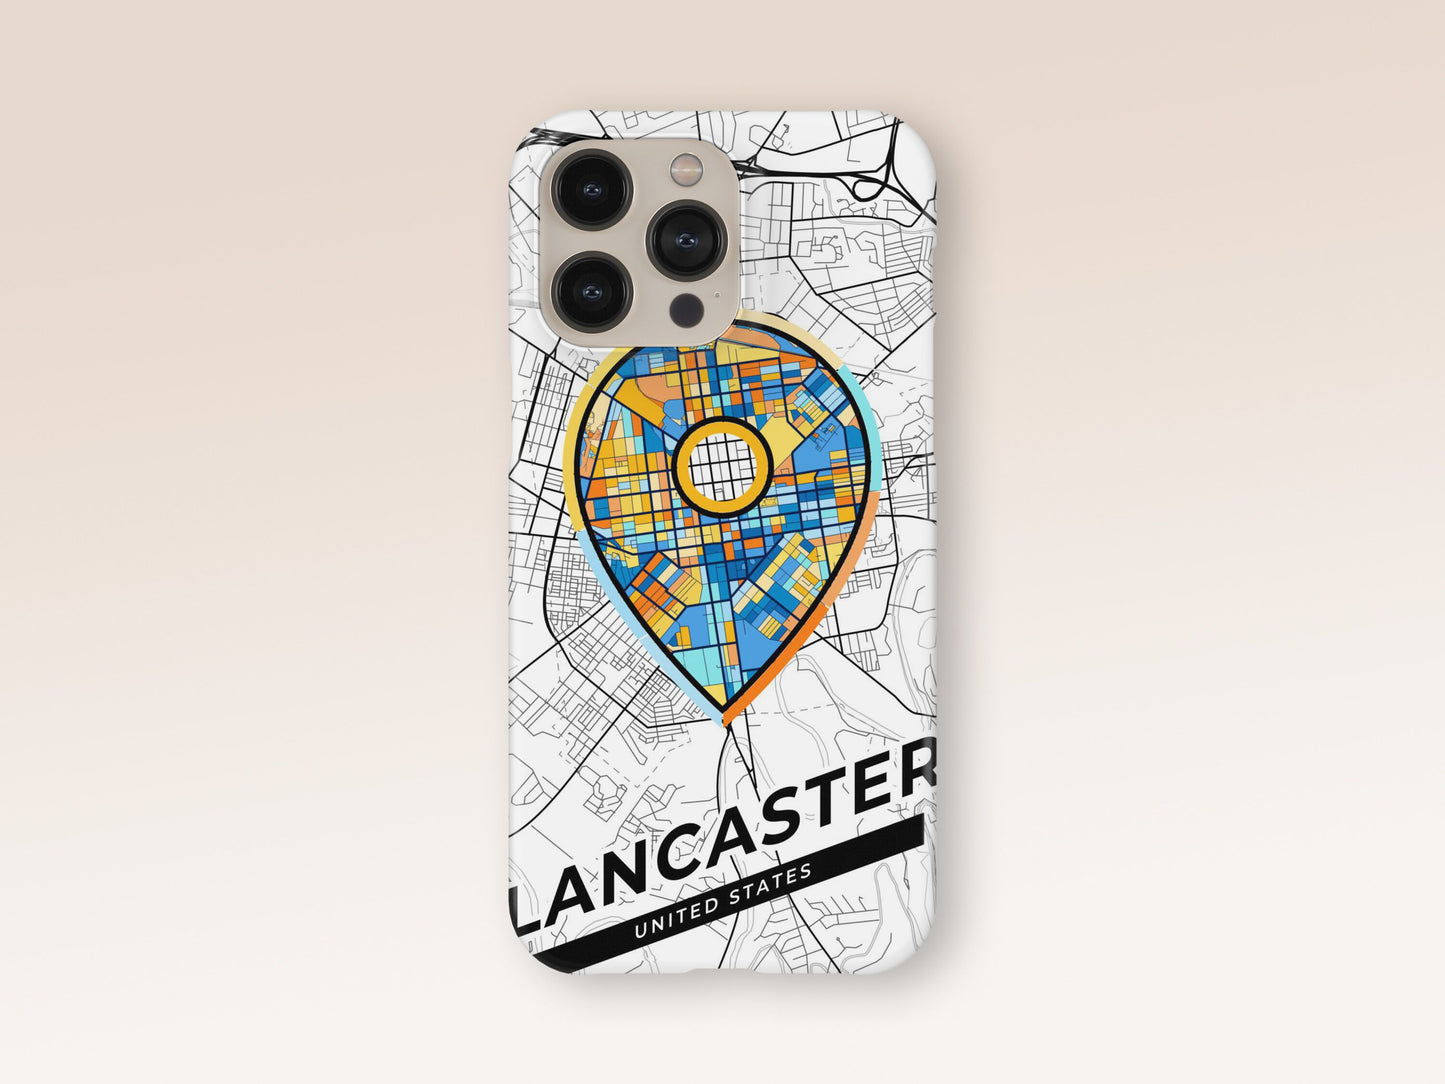 Lancaster Pennsylvania slim phone case with colorful icon. Birthday, wedding or housewarming gift. Couple match cases. 1